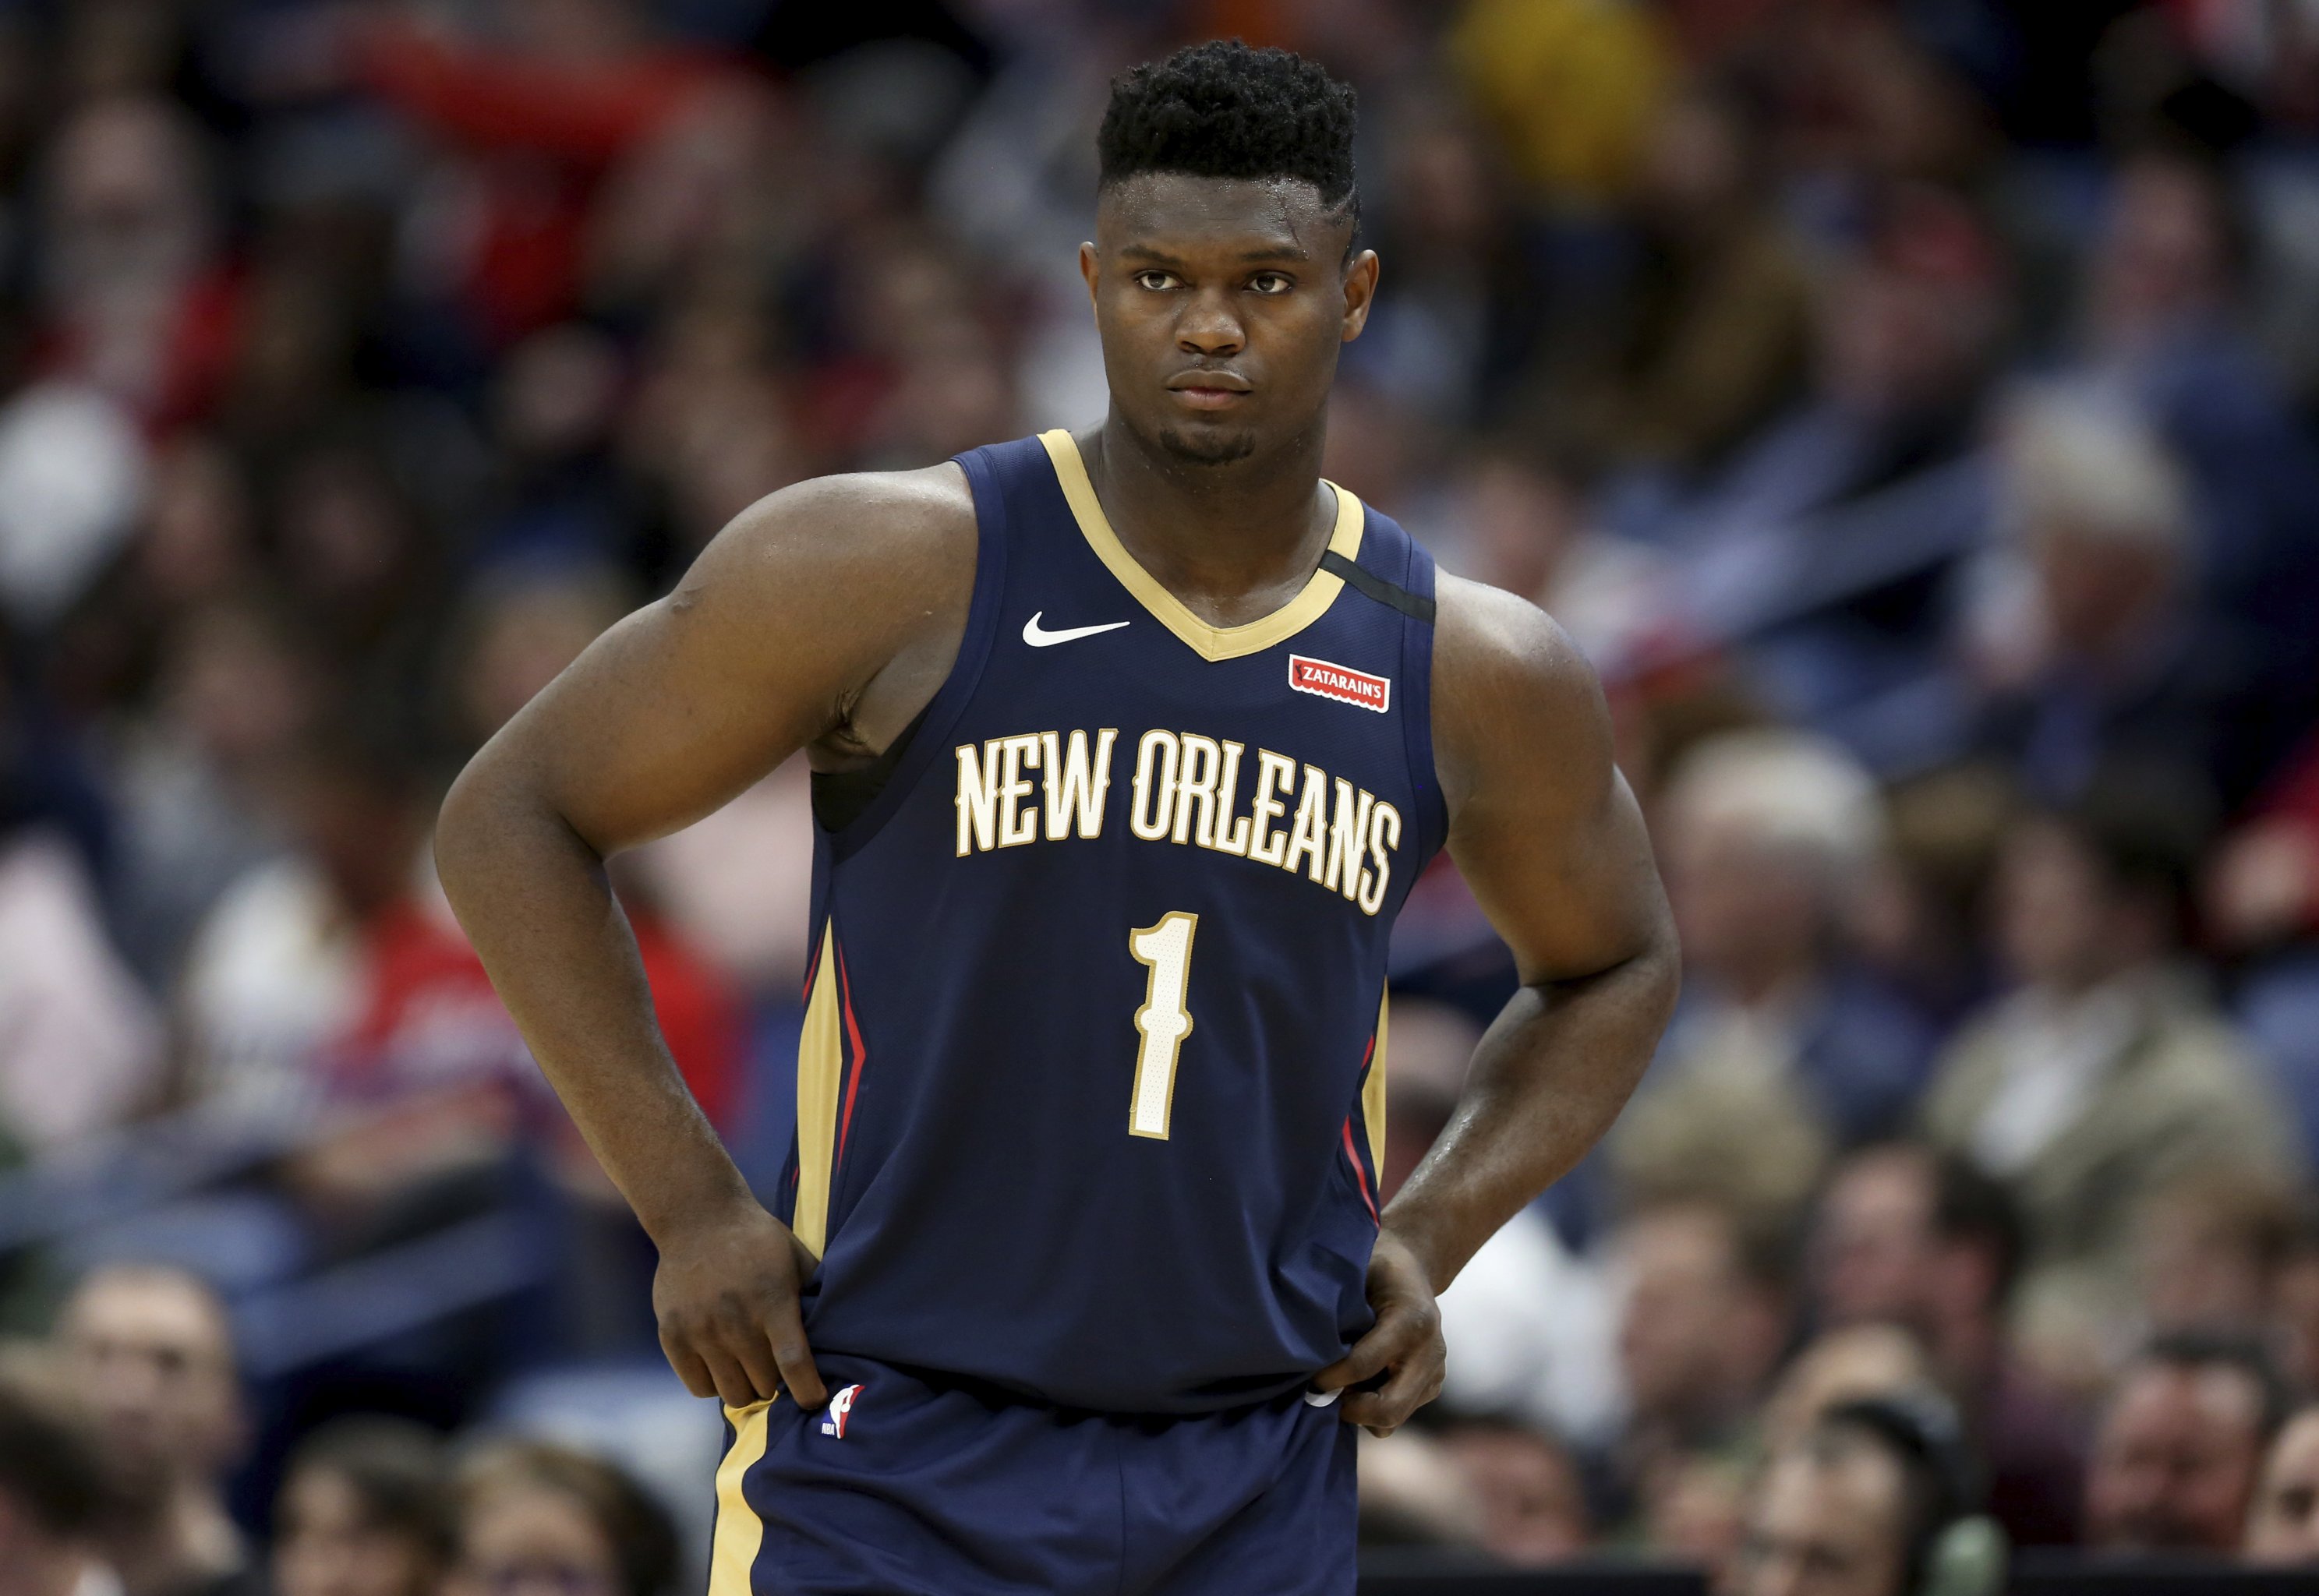 Is Zion Williamson destined to be the next Shawn Kemp